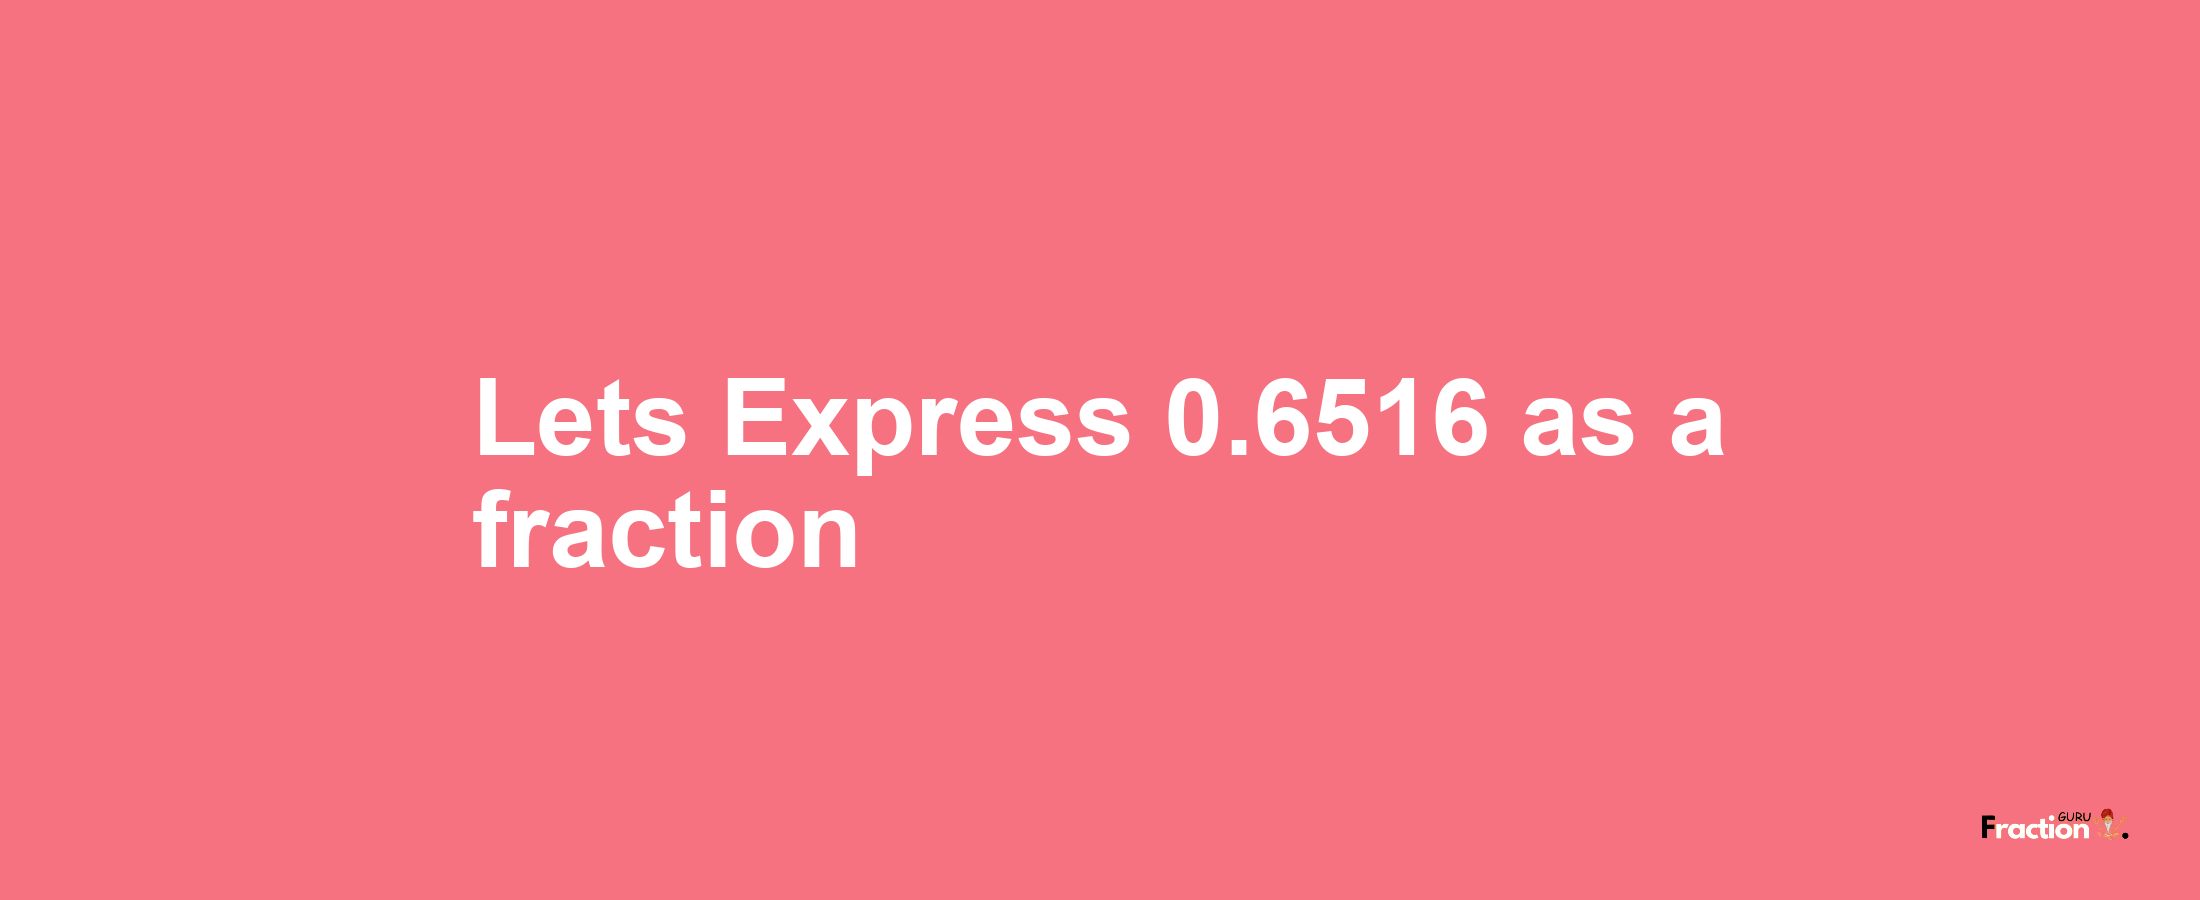 Lets Express 0.6516 as afraction